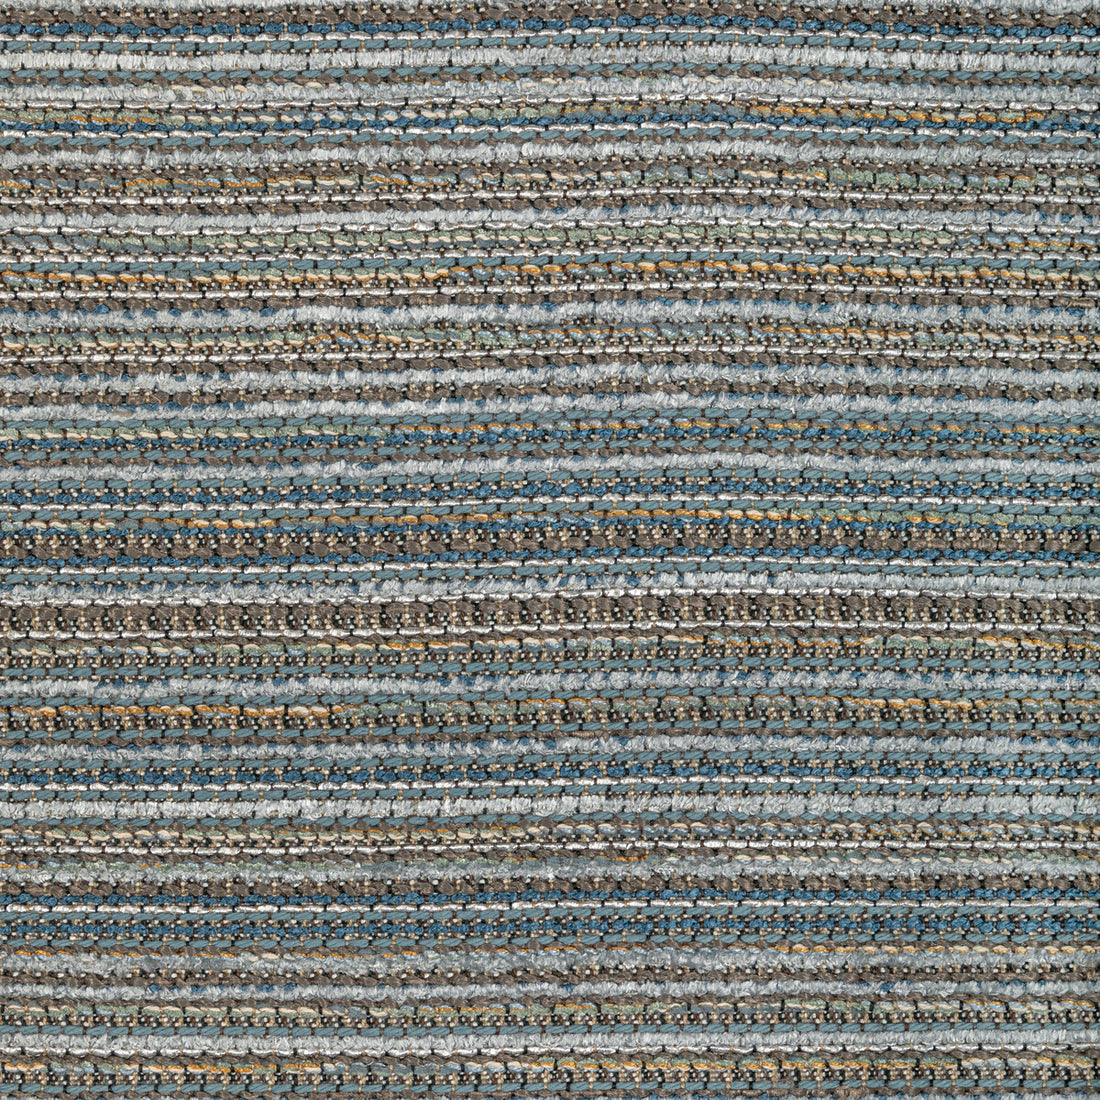 Kravet Design fabric in 36416-511 color - pattern 36416.511.0 - by Kravet Design in the Performance Crypton Home collection